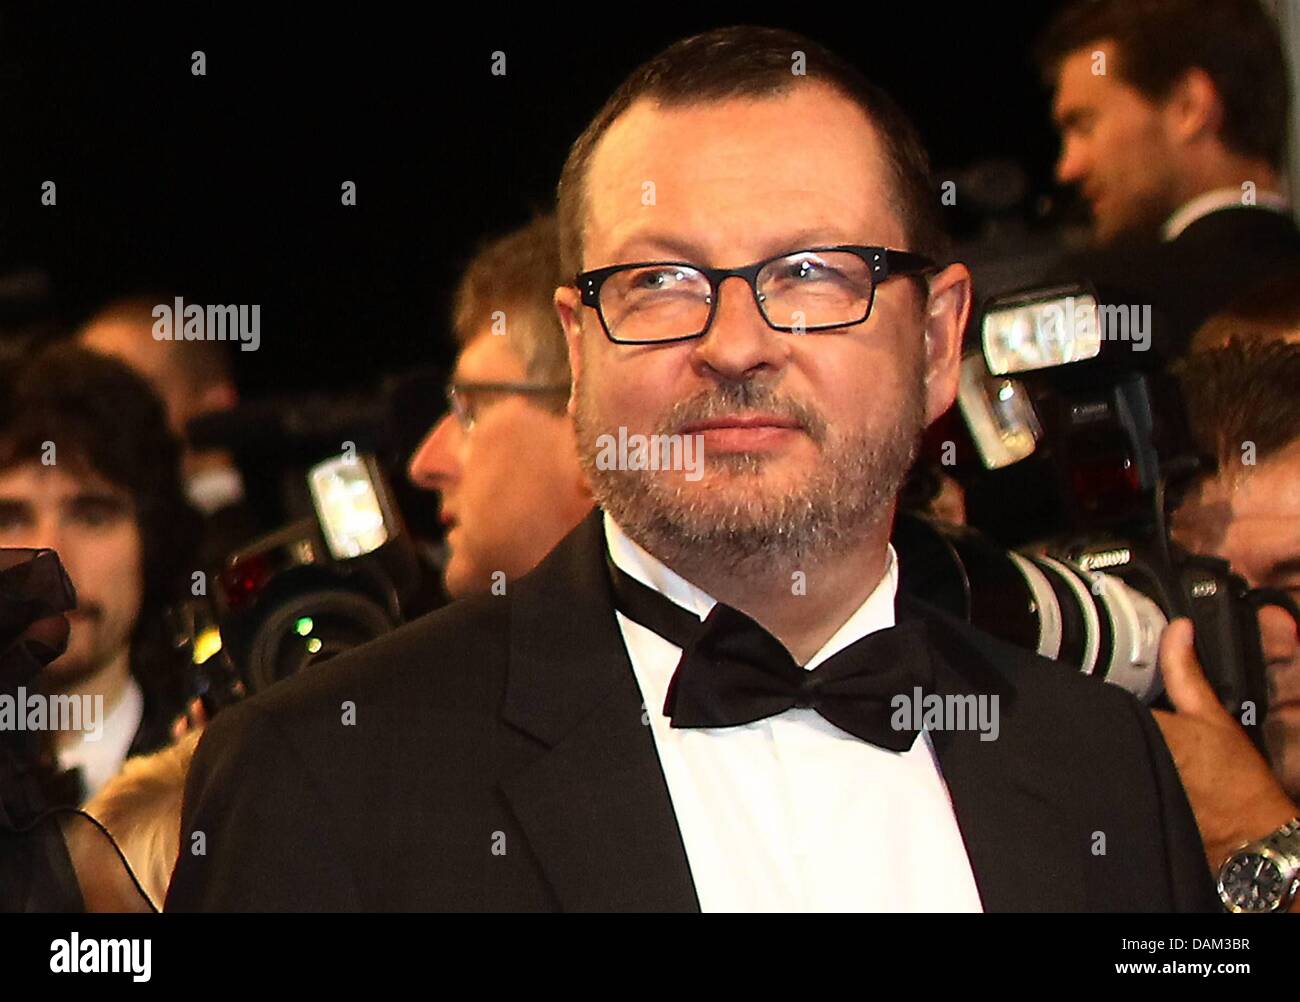 (dpa file) - A file picture dated 18 May 2011 shows Danish director Lars Von Trier arriving for the screening of his movie 'Melancholia' during the 64th Cannes Film Festival, in Cannes, France. Von Trier stirred controversy with remarks about his being a Nazi at a press conference on his movie in Cannes on 18 May 2011. After the press office of the Cannes Film Festival issued a rel Stock Photo